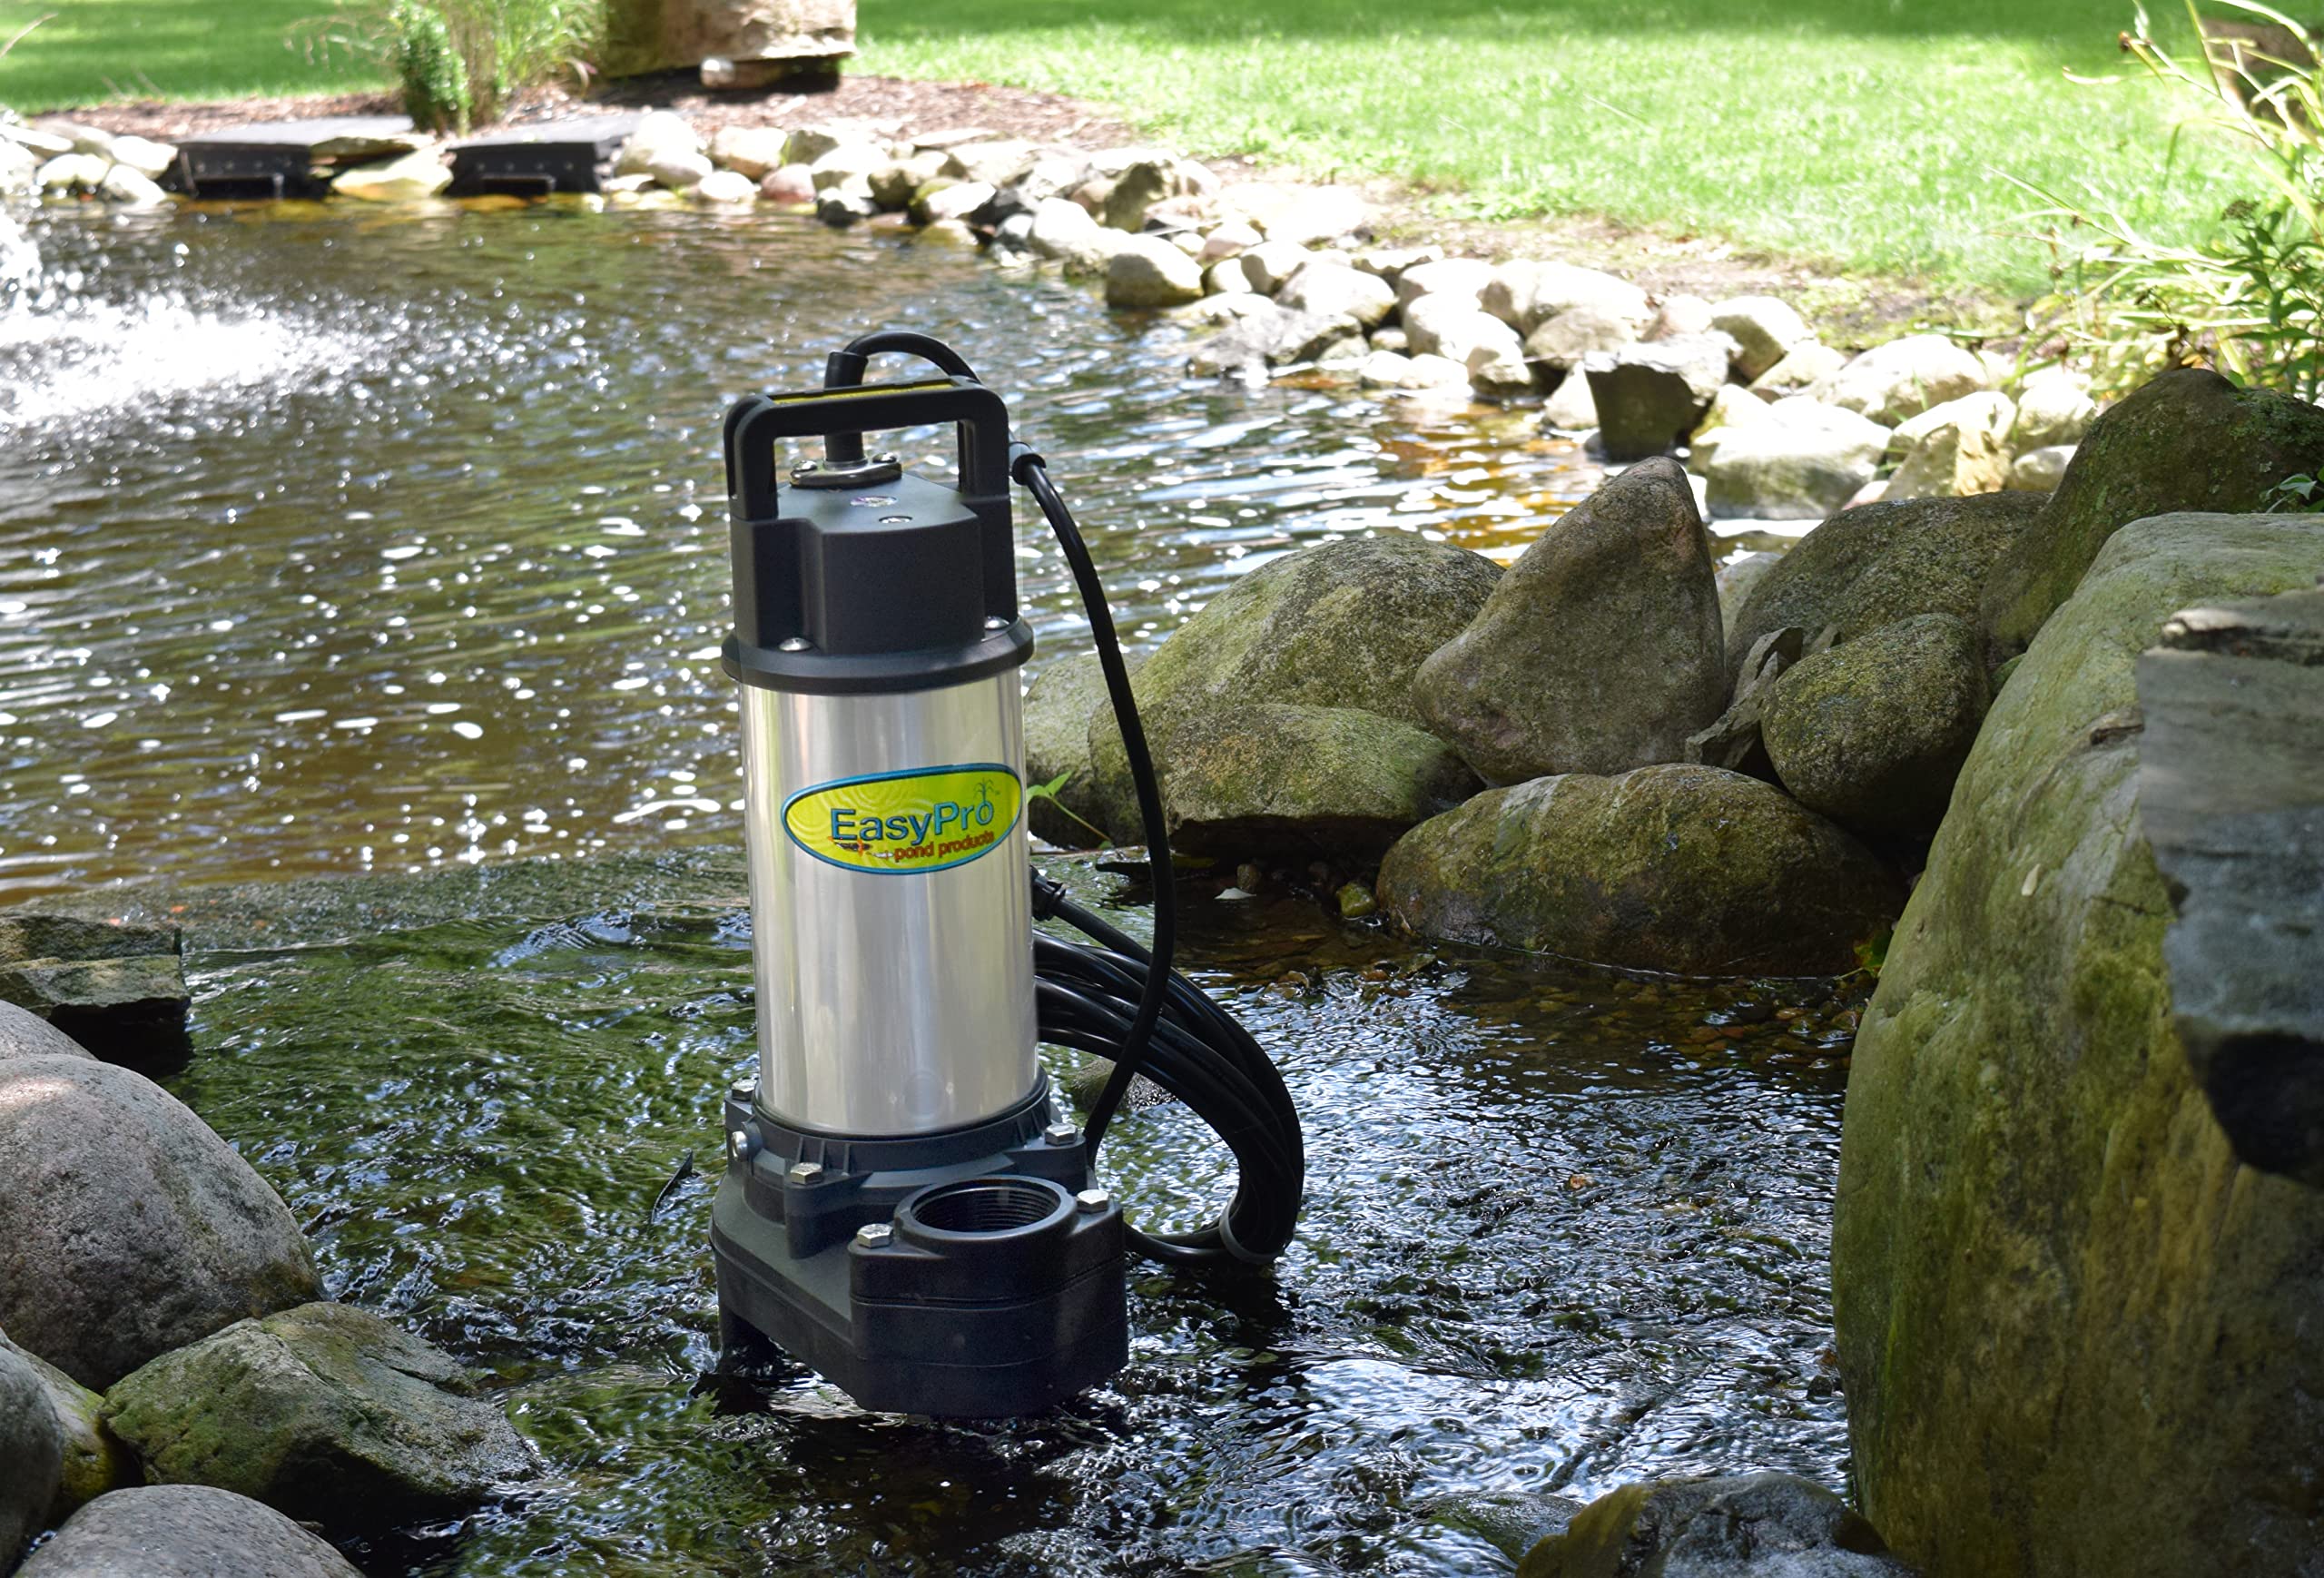 EasyPro TH150 Stainless Steel Waterfall and Stream Pump - Energy Efficient, Long Lasting Pump with 2 Year Warranty - 3100 GPH - 115 Volts - 20’ Power Cord